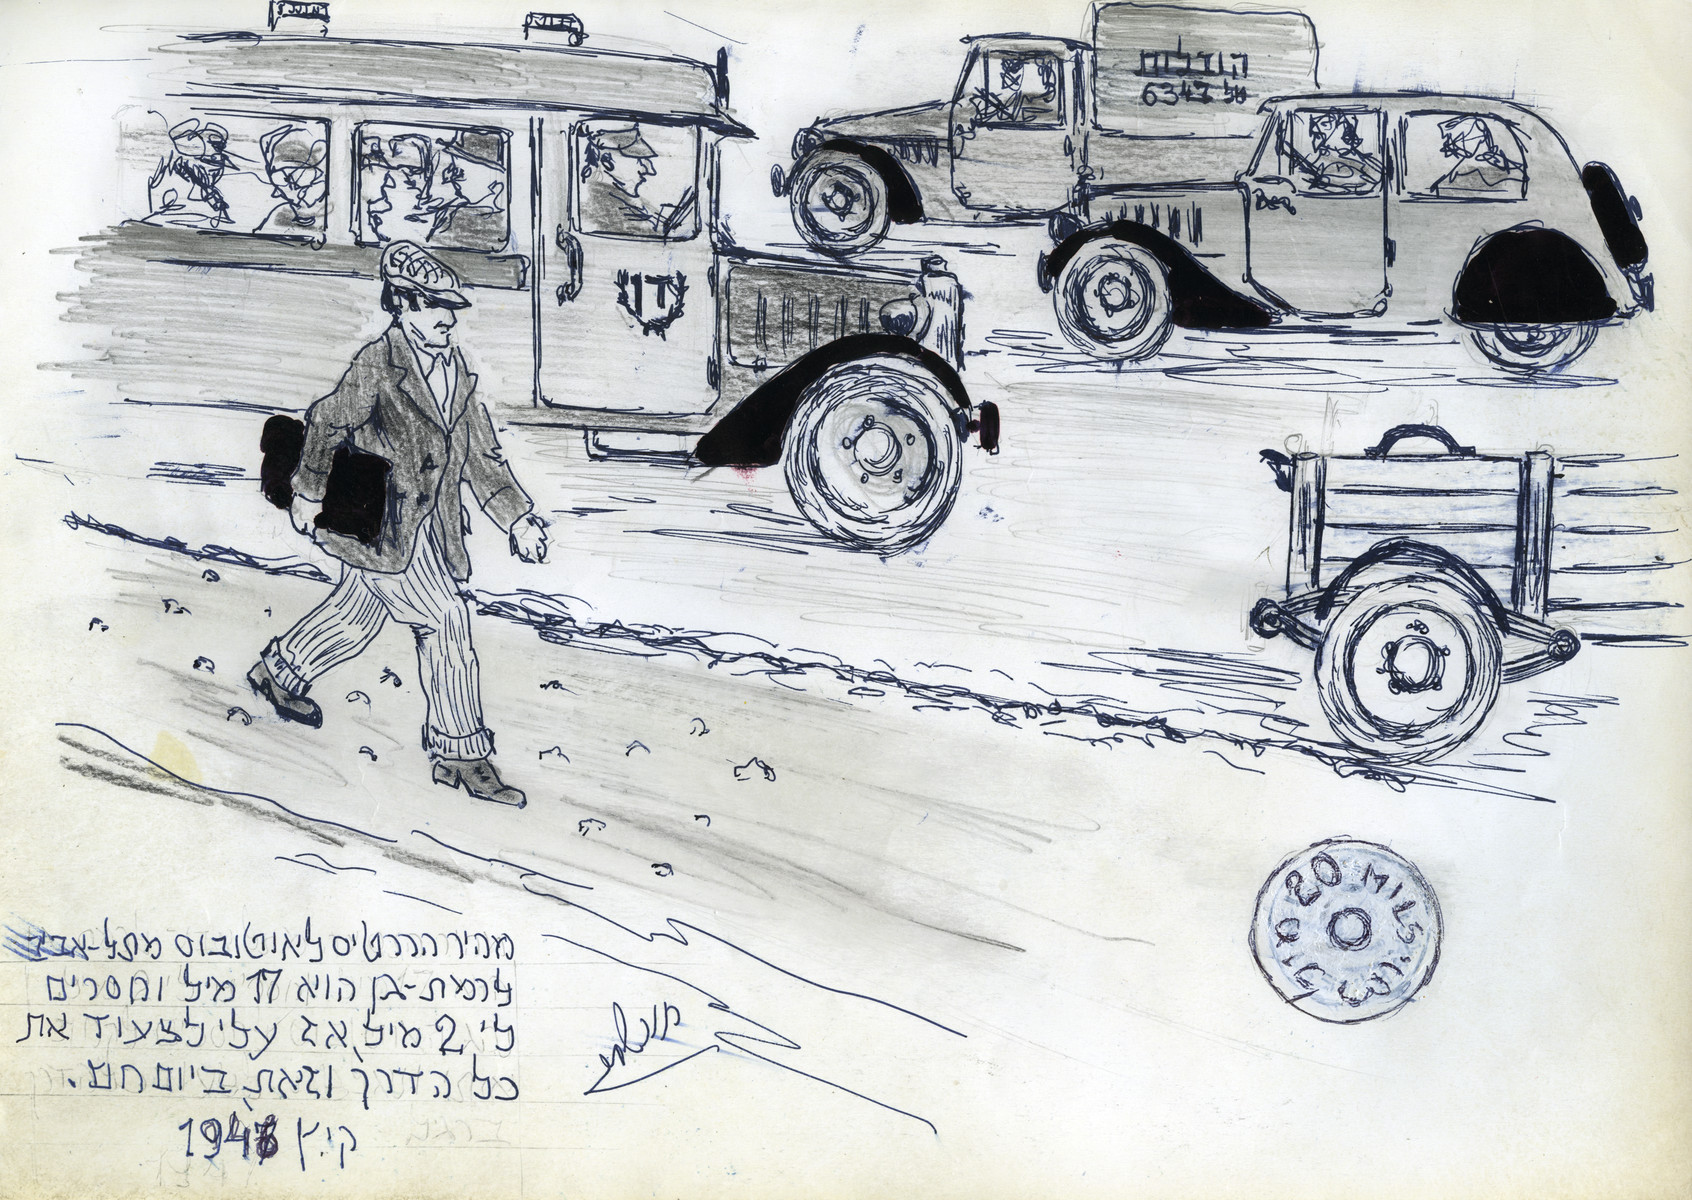 Page of a pictoral memoir drawn by the donor documenting his experiences after the Holocaust.

The drawing shows the artist walking by foot after not having enough money to ride by bus.  (Chronologically this drawing follows w/s 55108.)